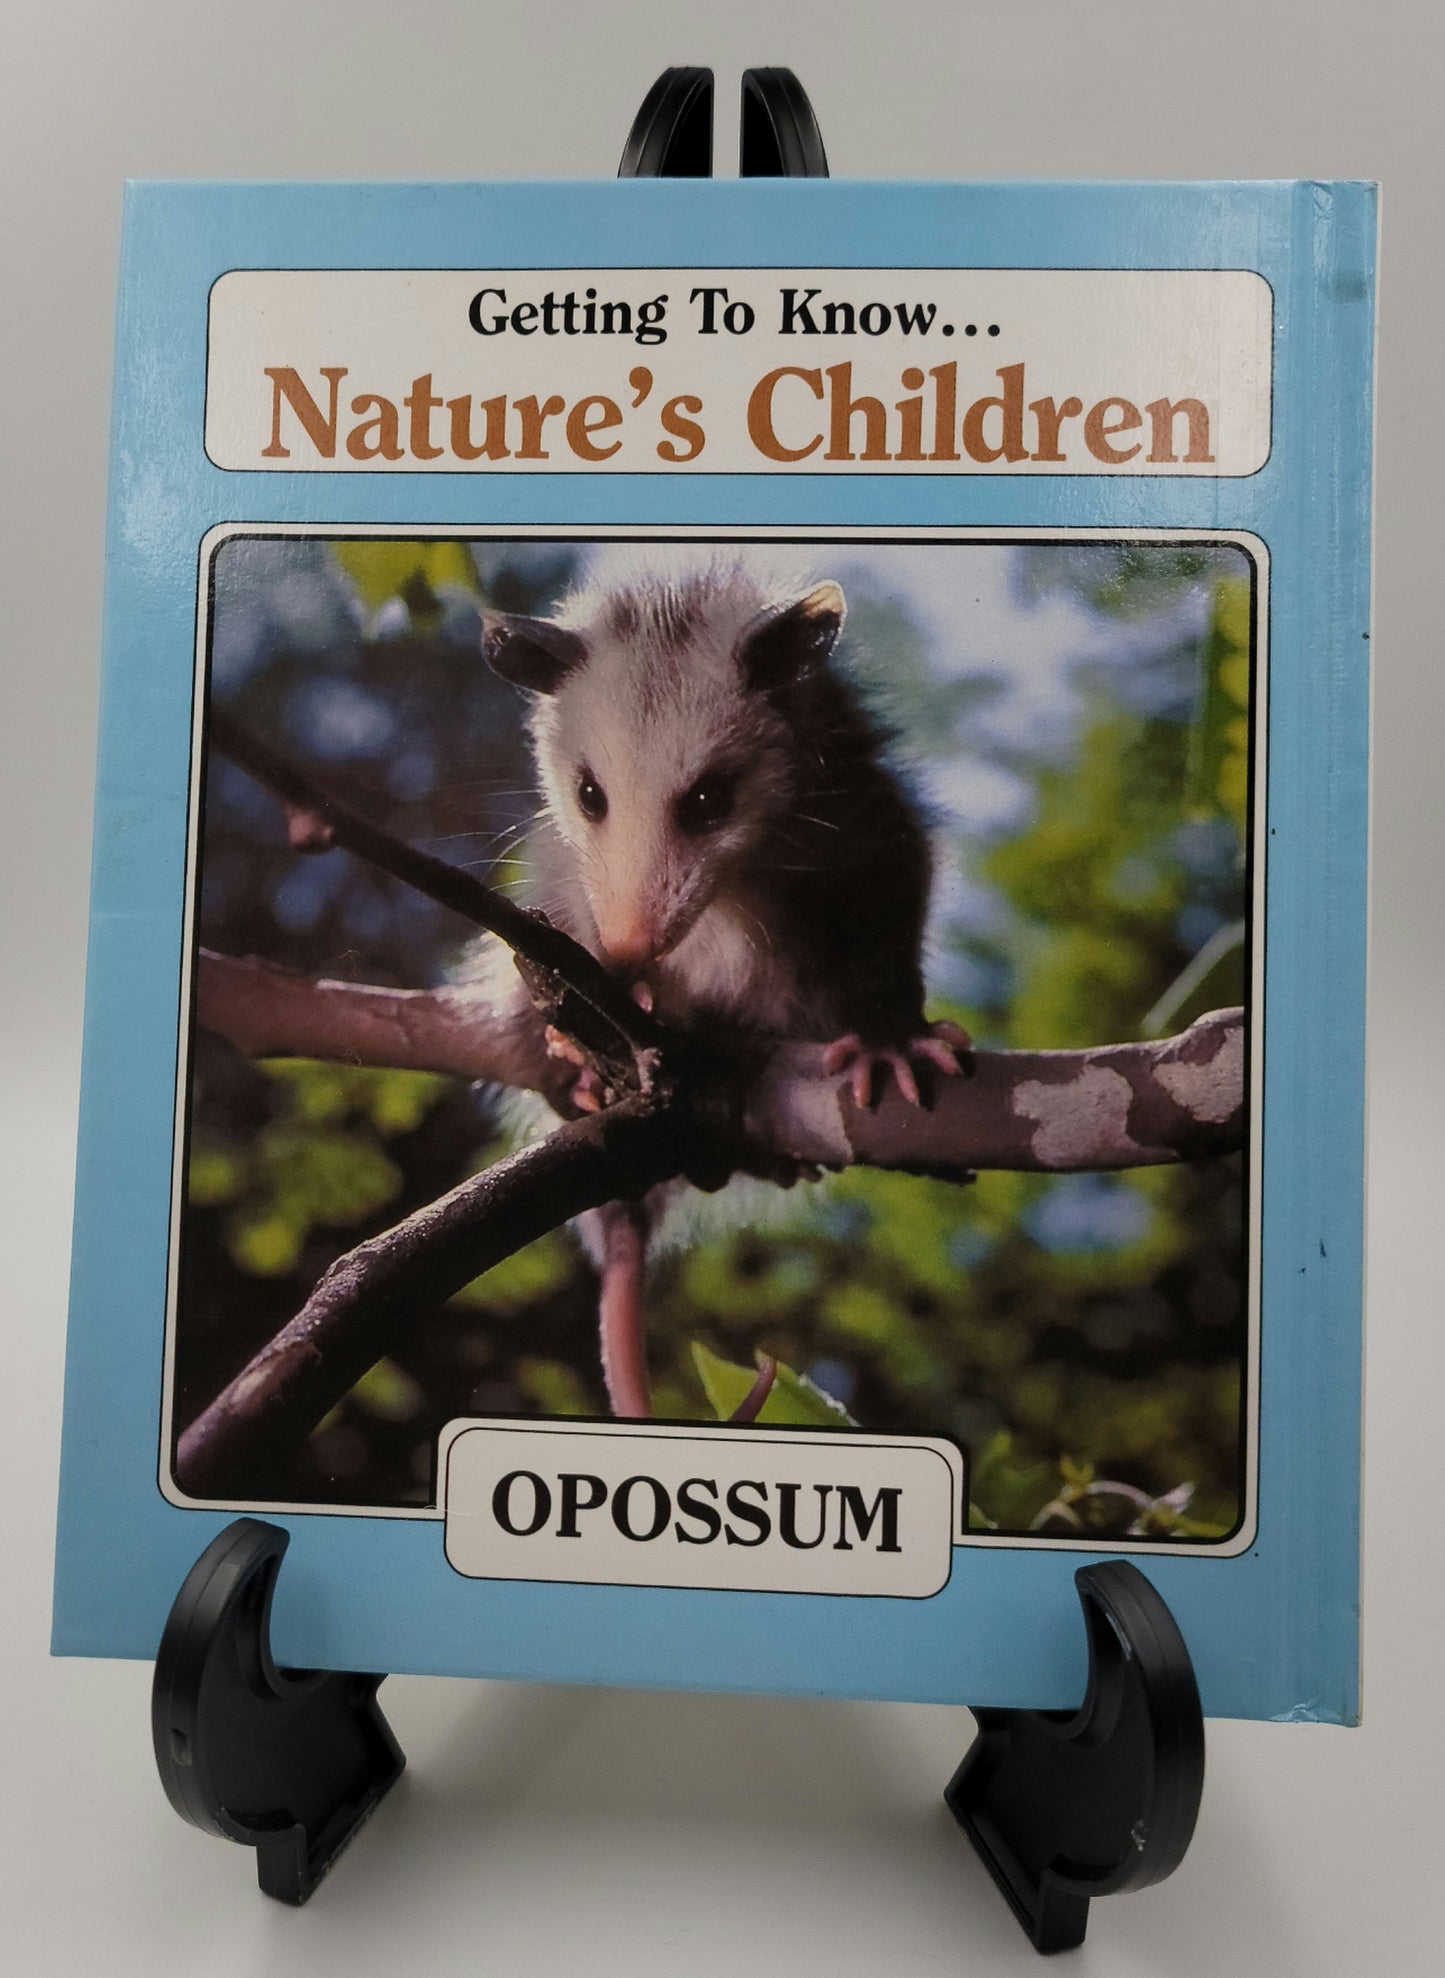 Bison by Laima Dingwall and Opossum by Laima Dingwall (Getting to Know... Nature's Children #8)